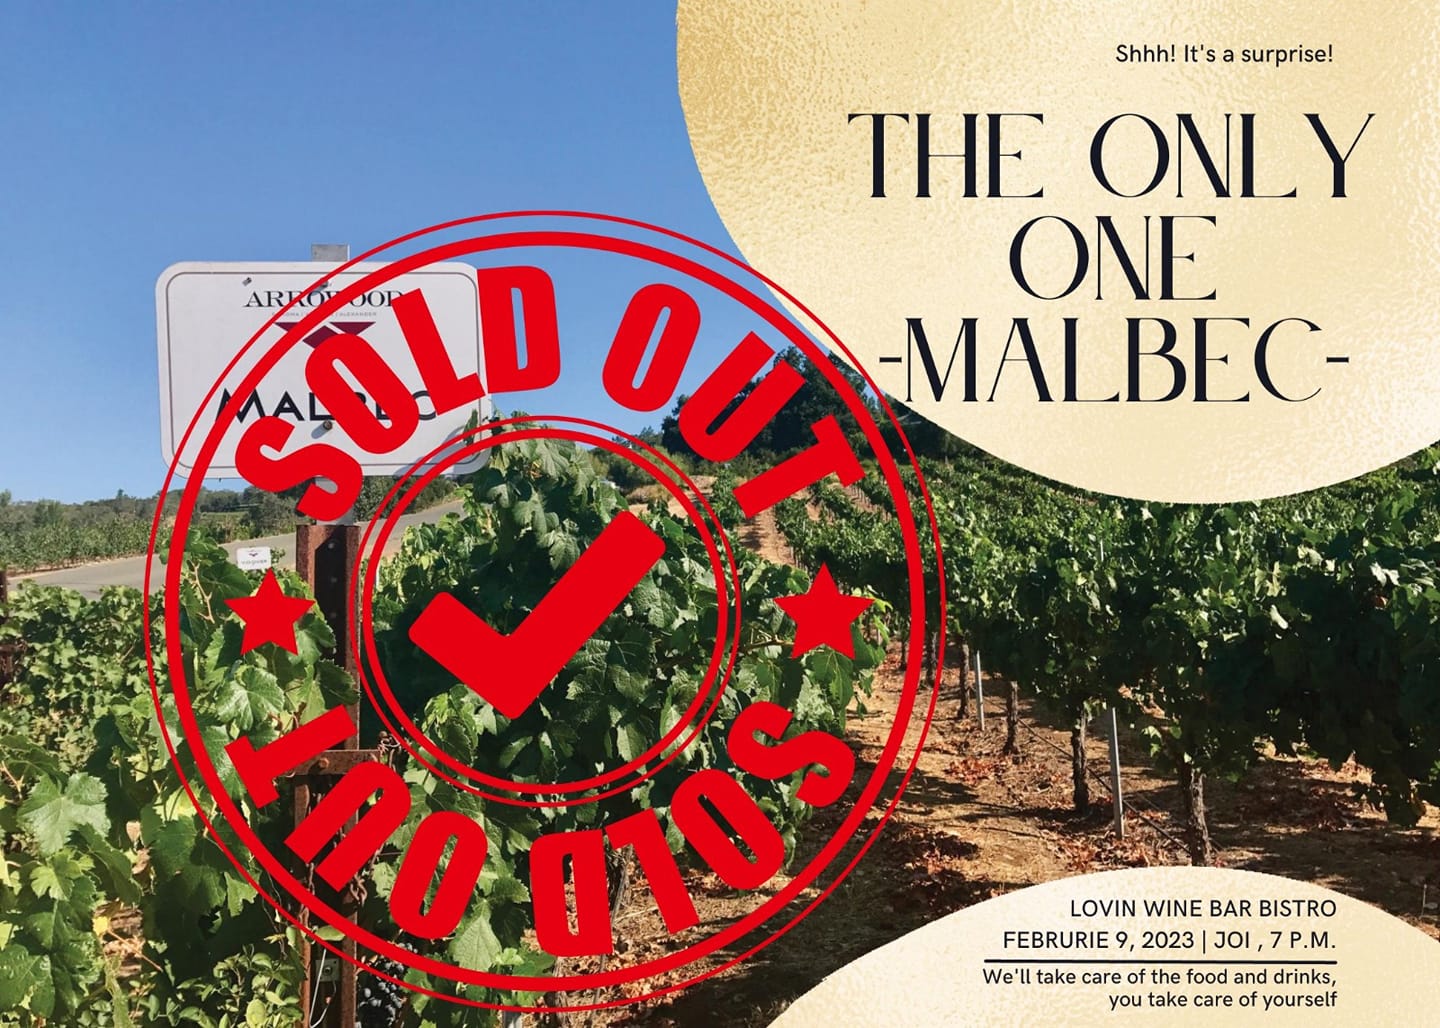 The Magical Grape #2: The only one - Malbec (Bucuresti)